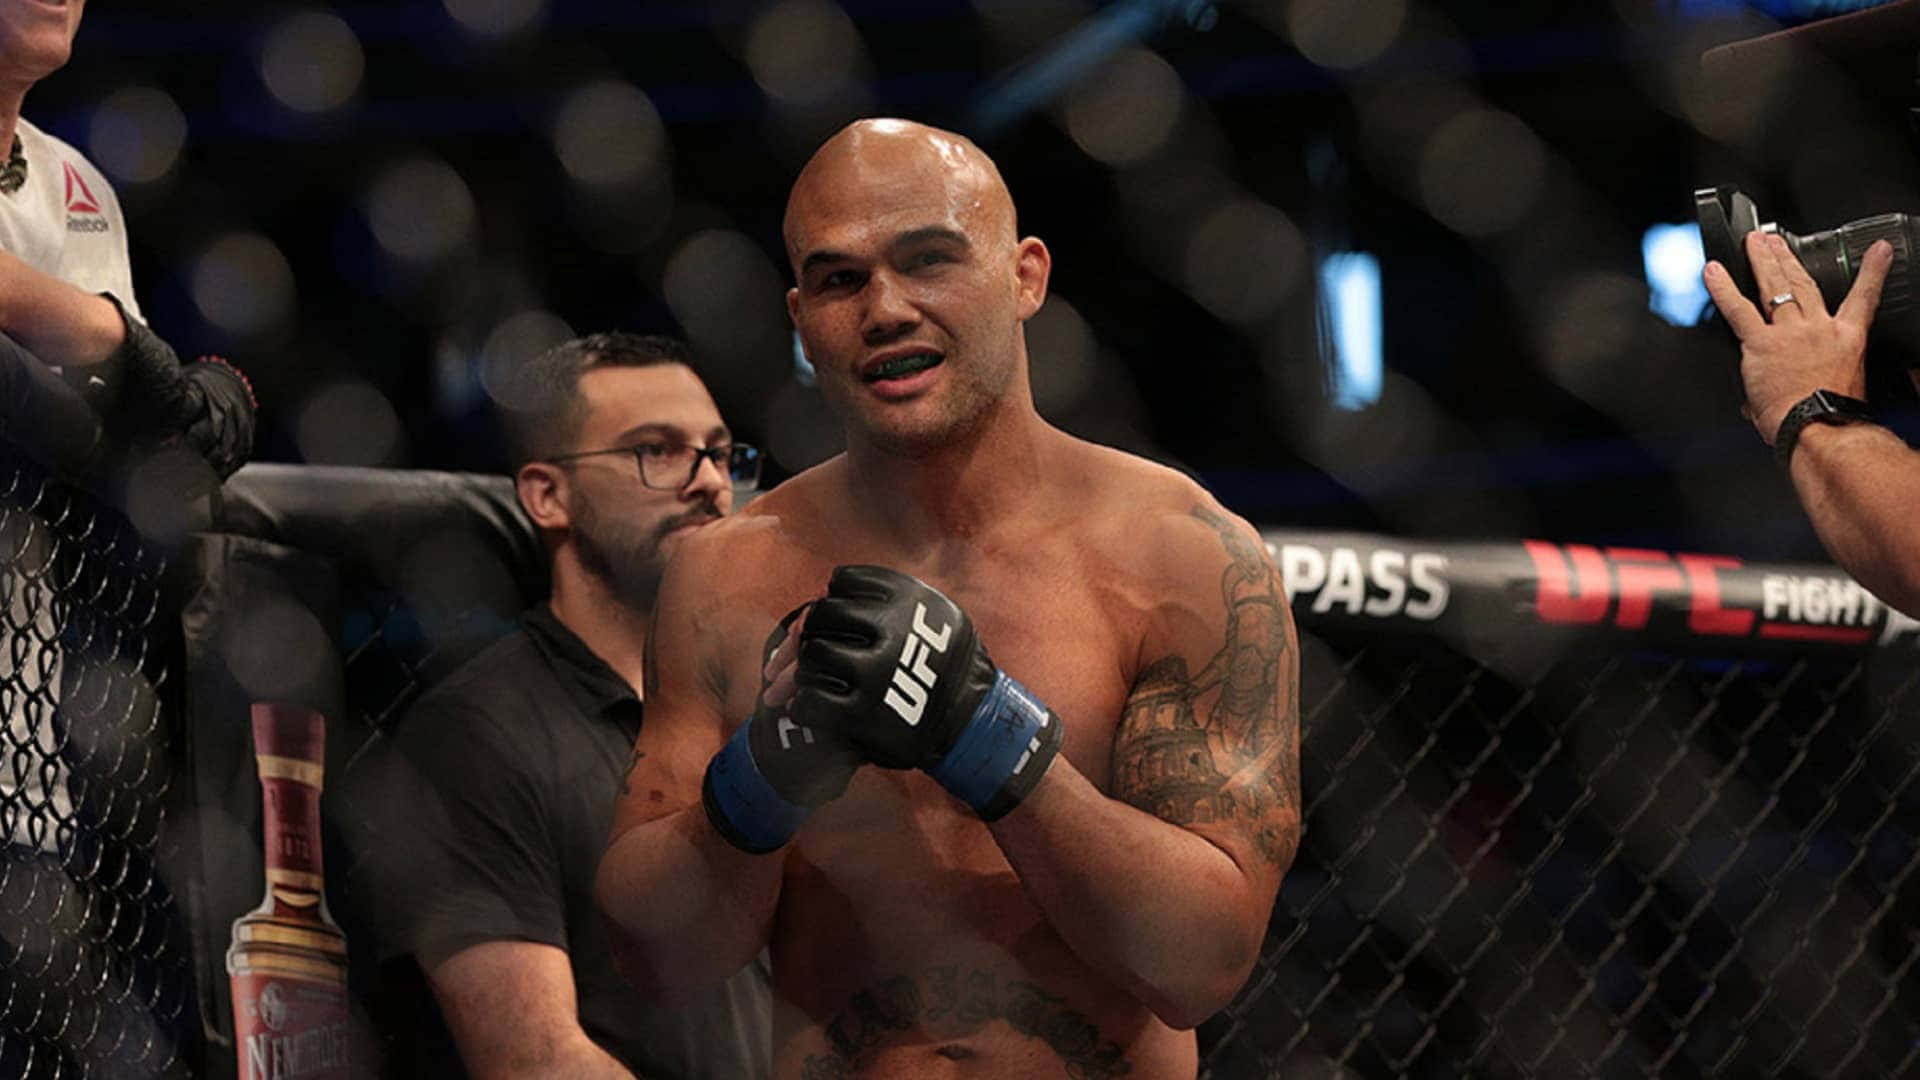 Robbie Lawler Celebrating Victory at UFC Event Wallpaper